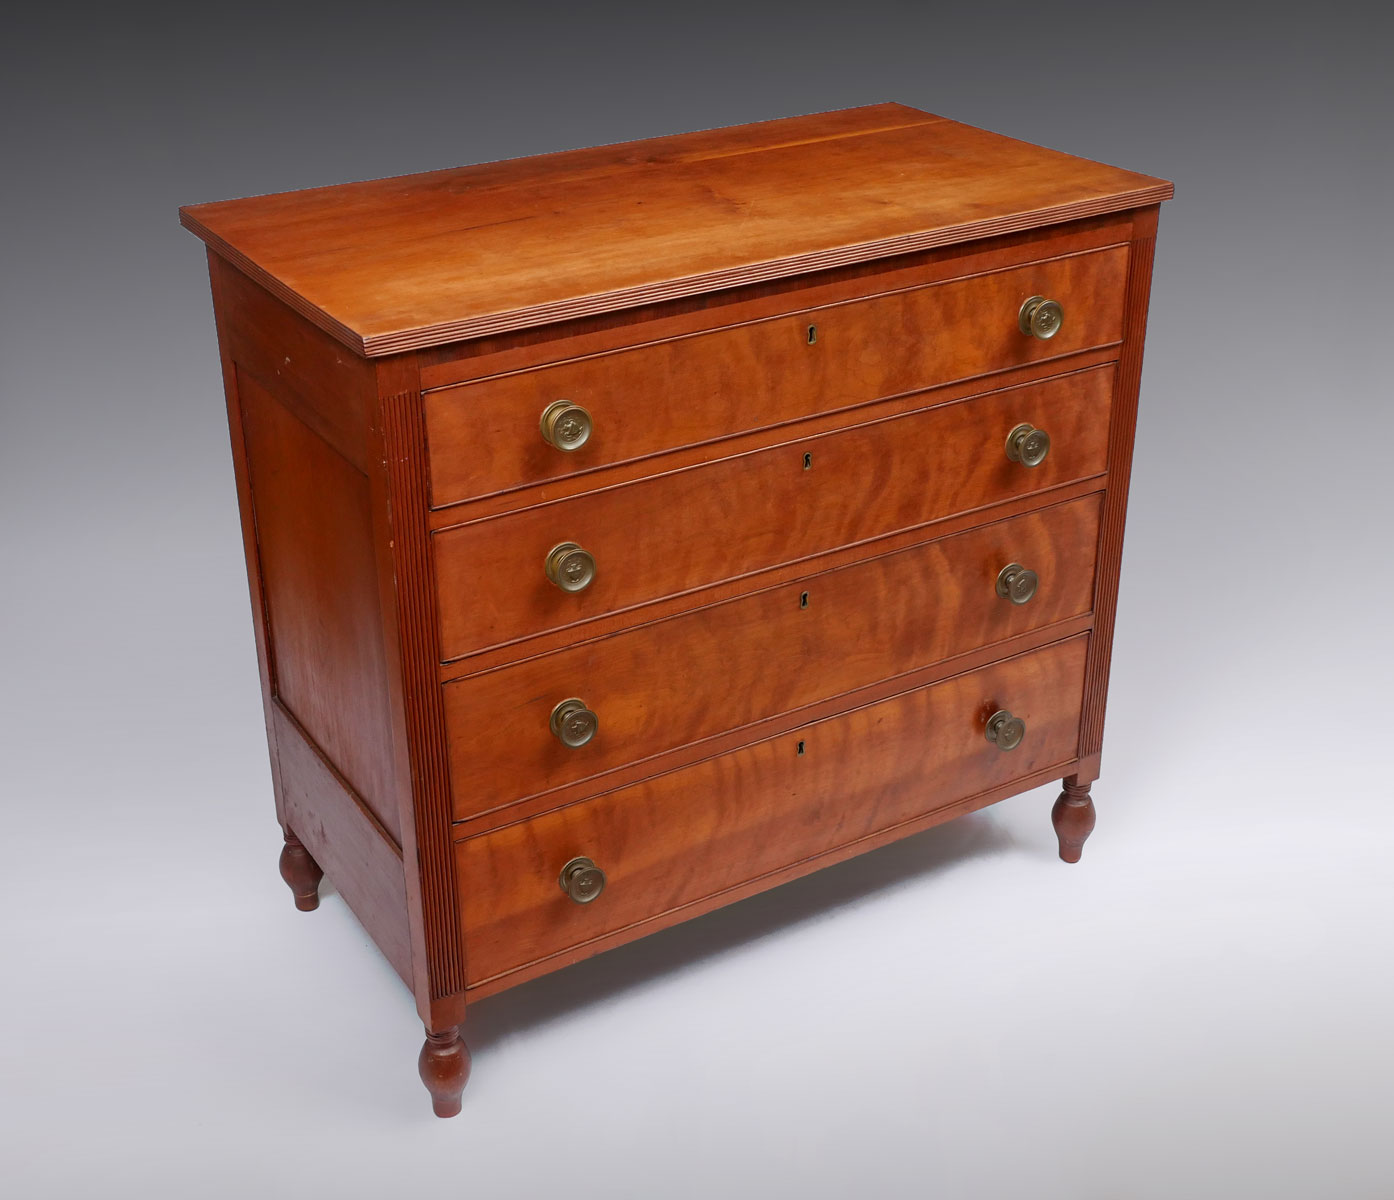 FEDERAL PERIOD 4 DRAWER CHEST: